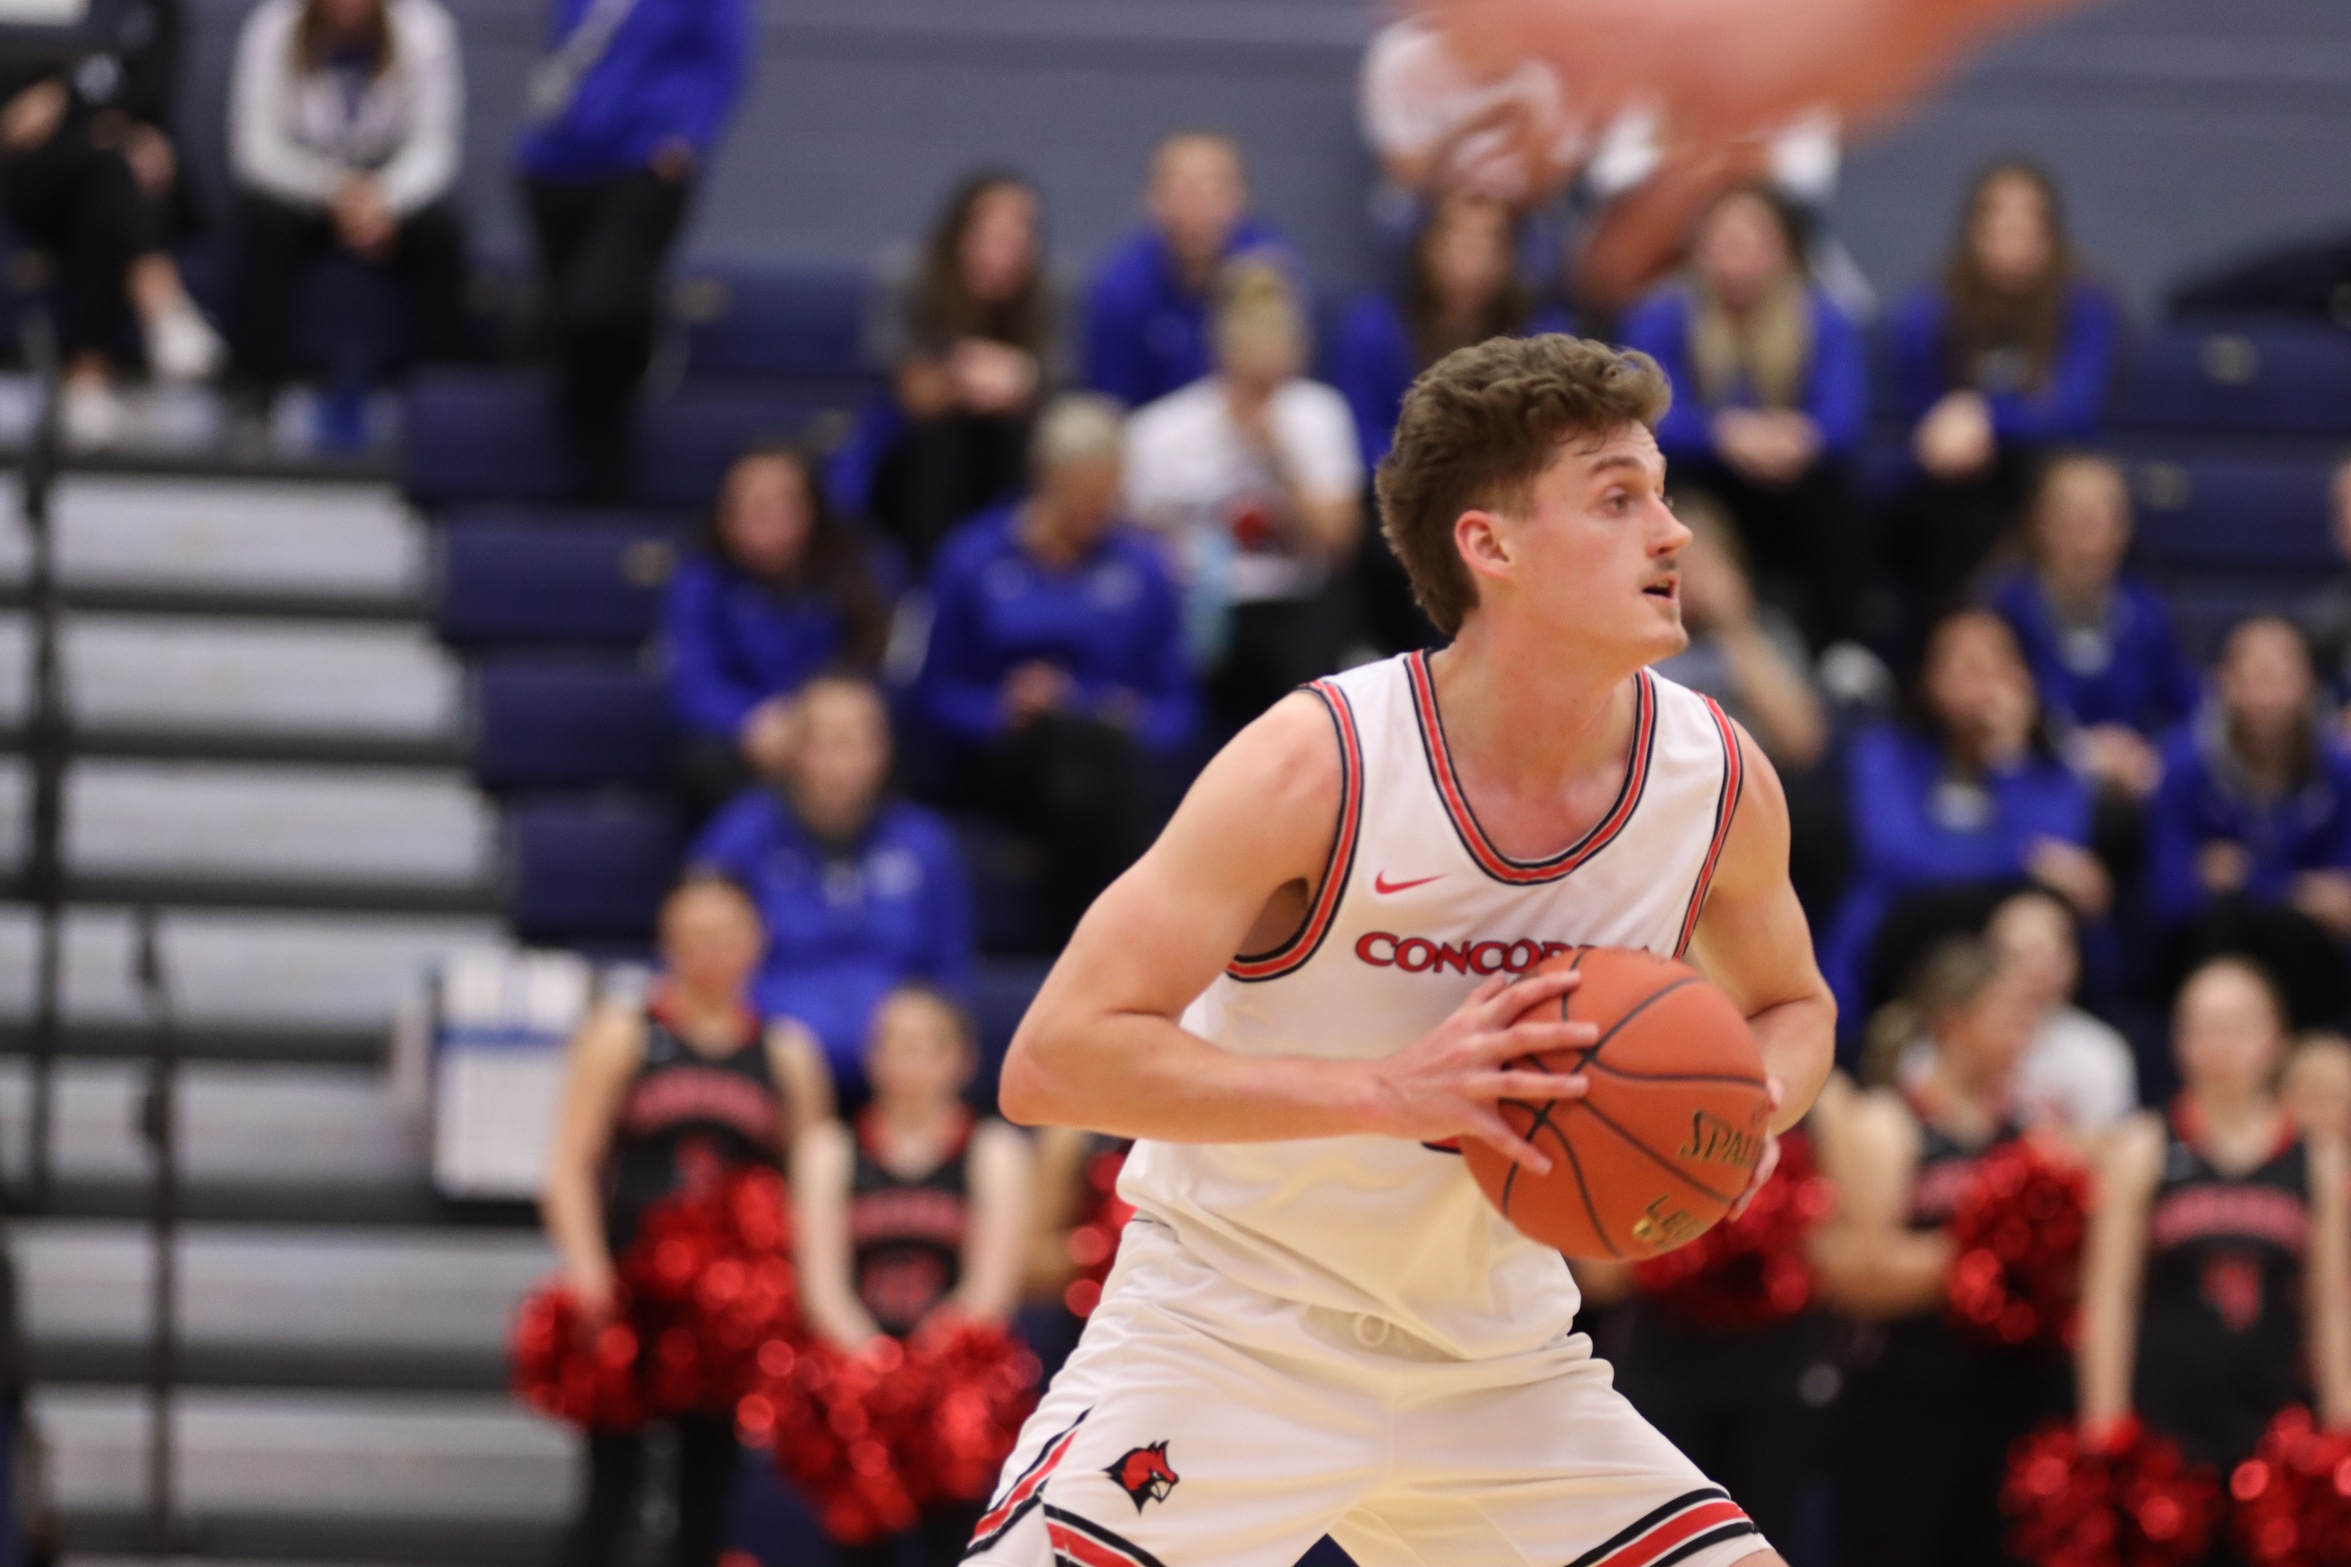 Men's Basketball falls to Concordia Wisconsin at CIT